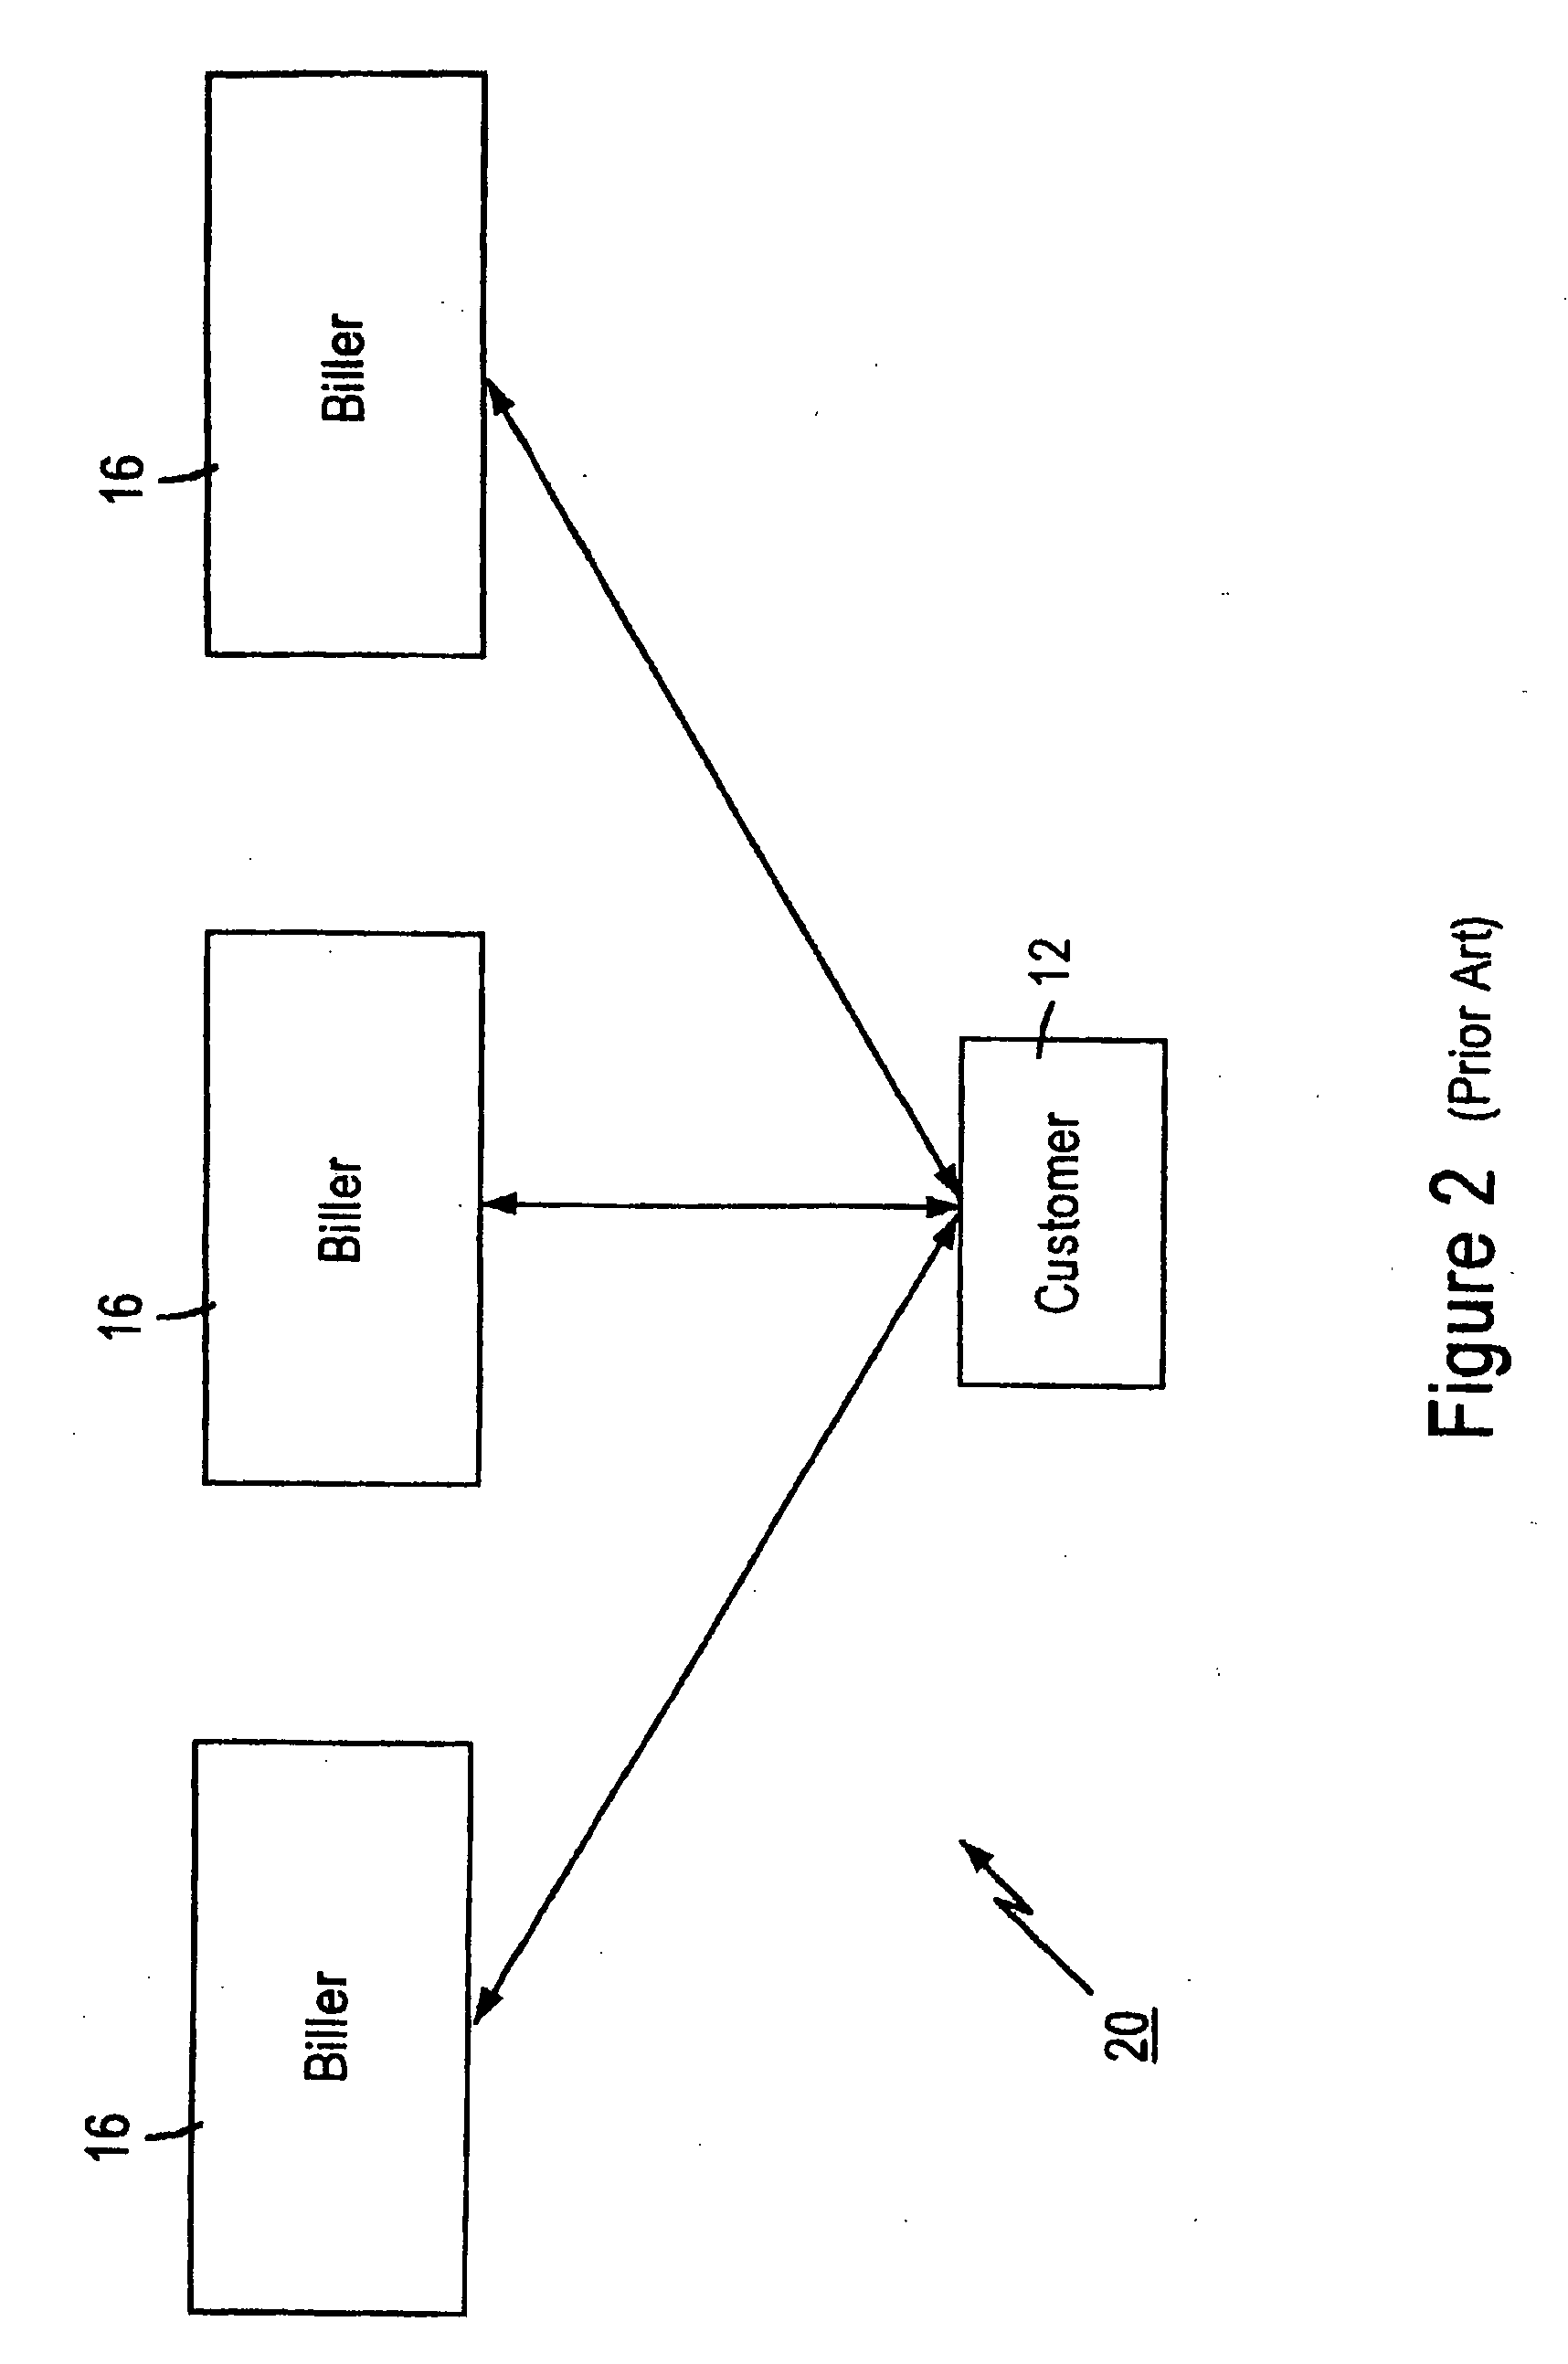 Presentation and payment of bills over a wide area communications network